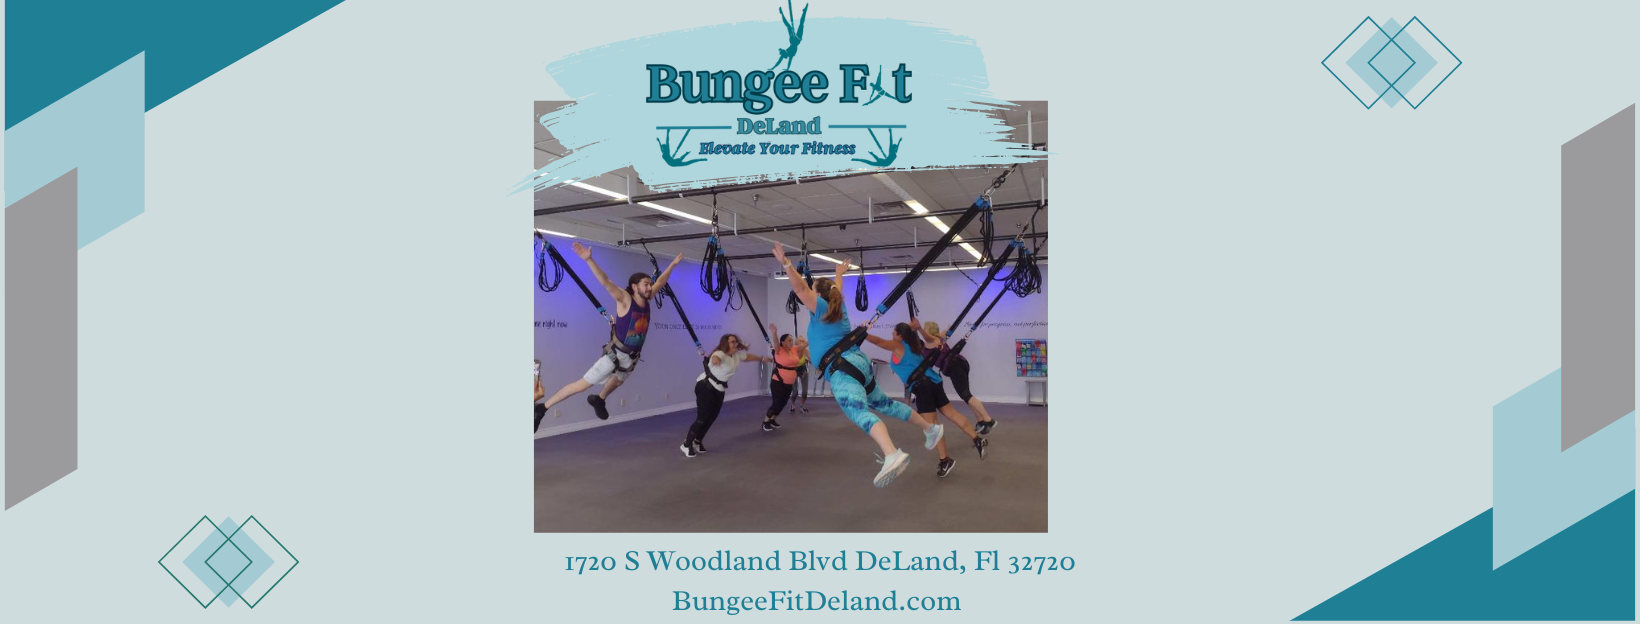 Bungee Fit DeLand Cover Photo. Shows participants doing a jump stunt on the bungee. At the bottom is the address: 1720 S Woodland Blvd. DeLand, Fl 32720